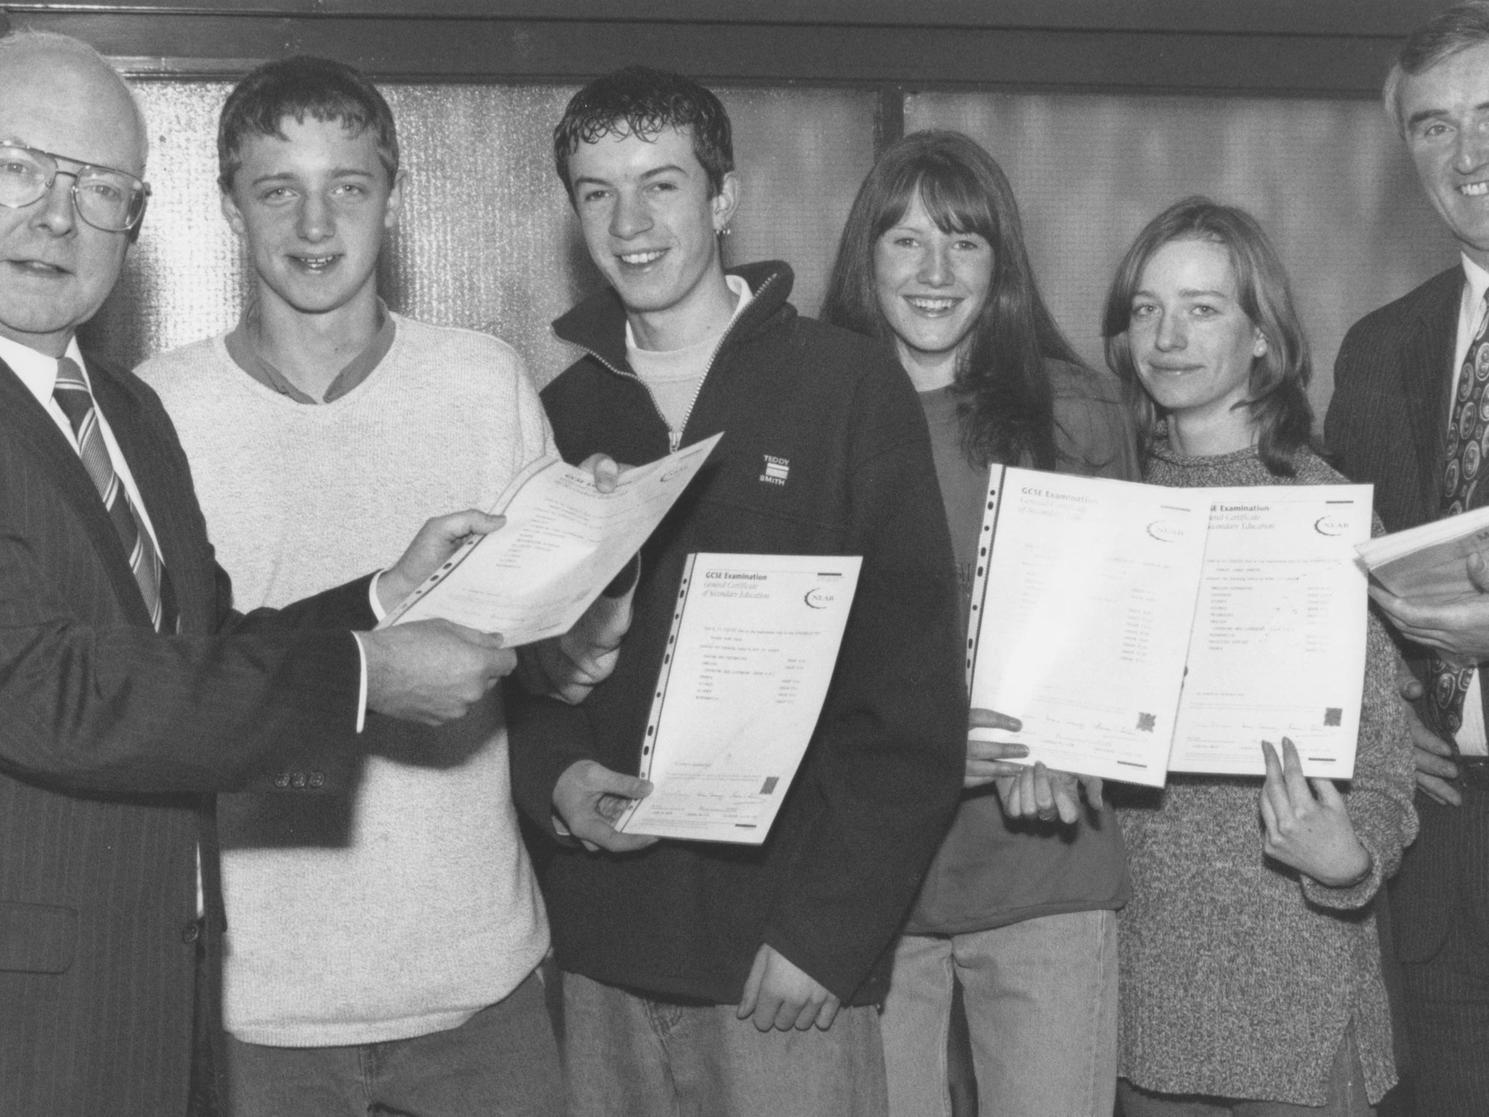 In December 1997 St Augustine's headteacher Keith Bear, left, presented GCSE certificates to former pupils, from left, Timonty Nicholson, Richard Acott, Lesley Horncastle, Rachel Connor. Also pictured is deputy head Roger Cannon.